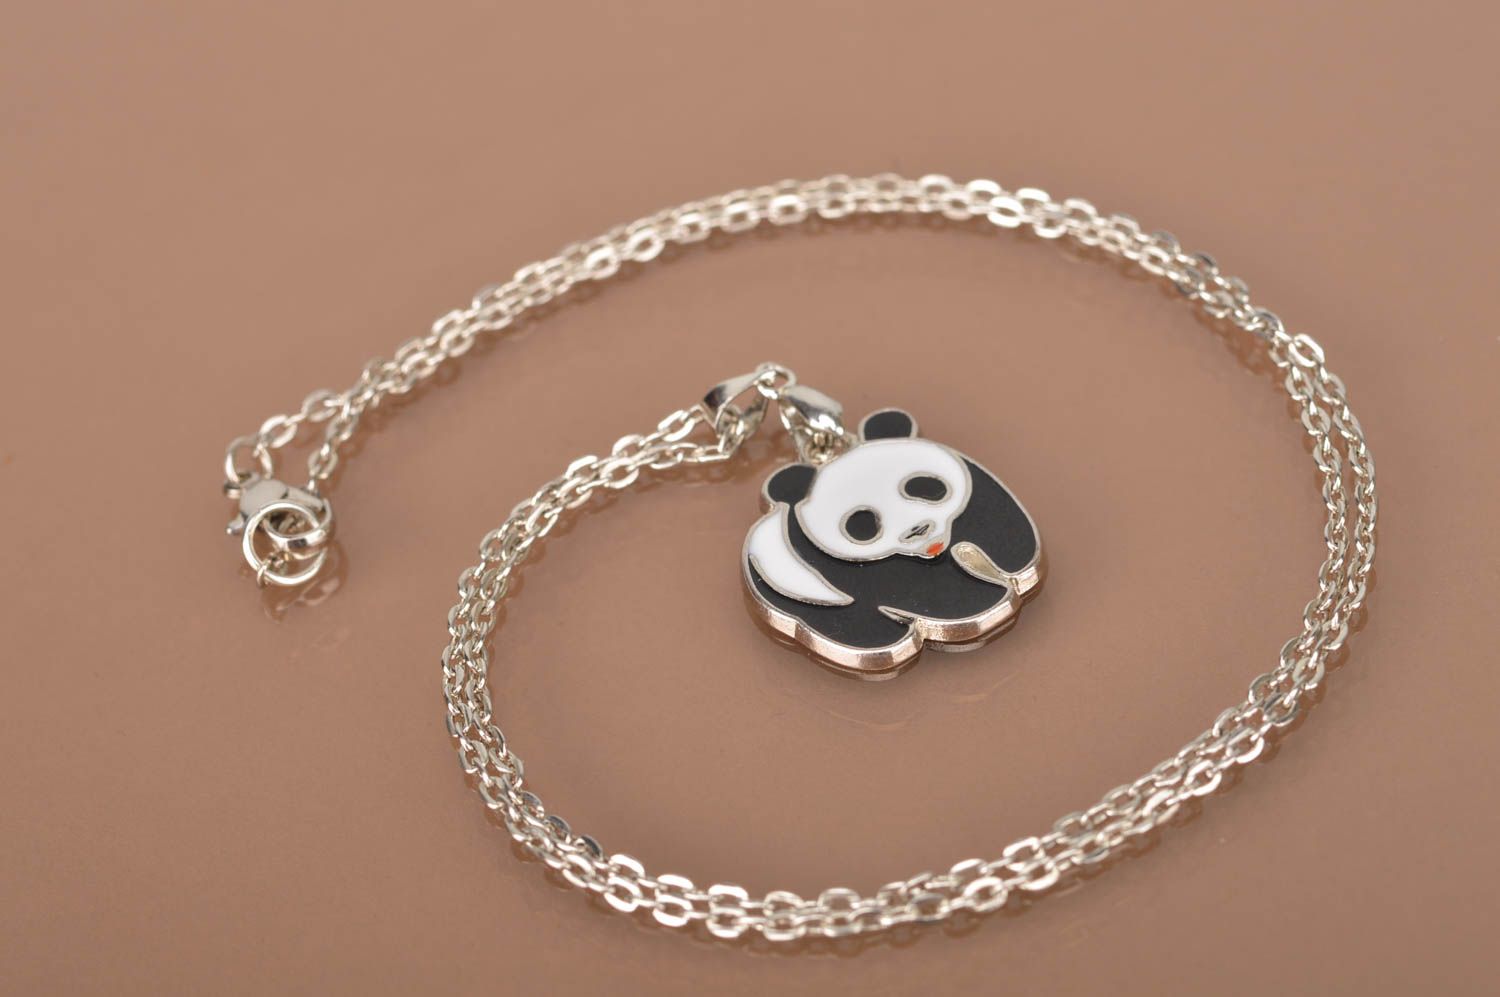 Unusual homemade metal pendant panda fashion jewelry trends gifts for her photo 4